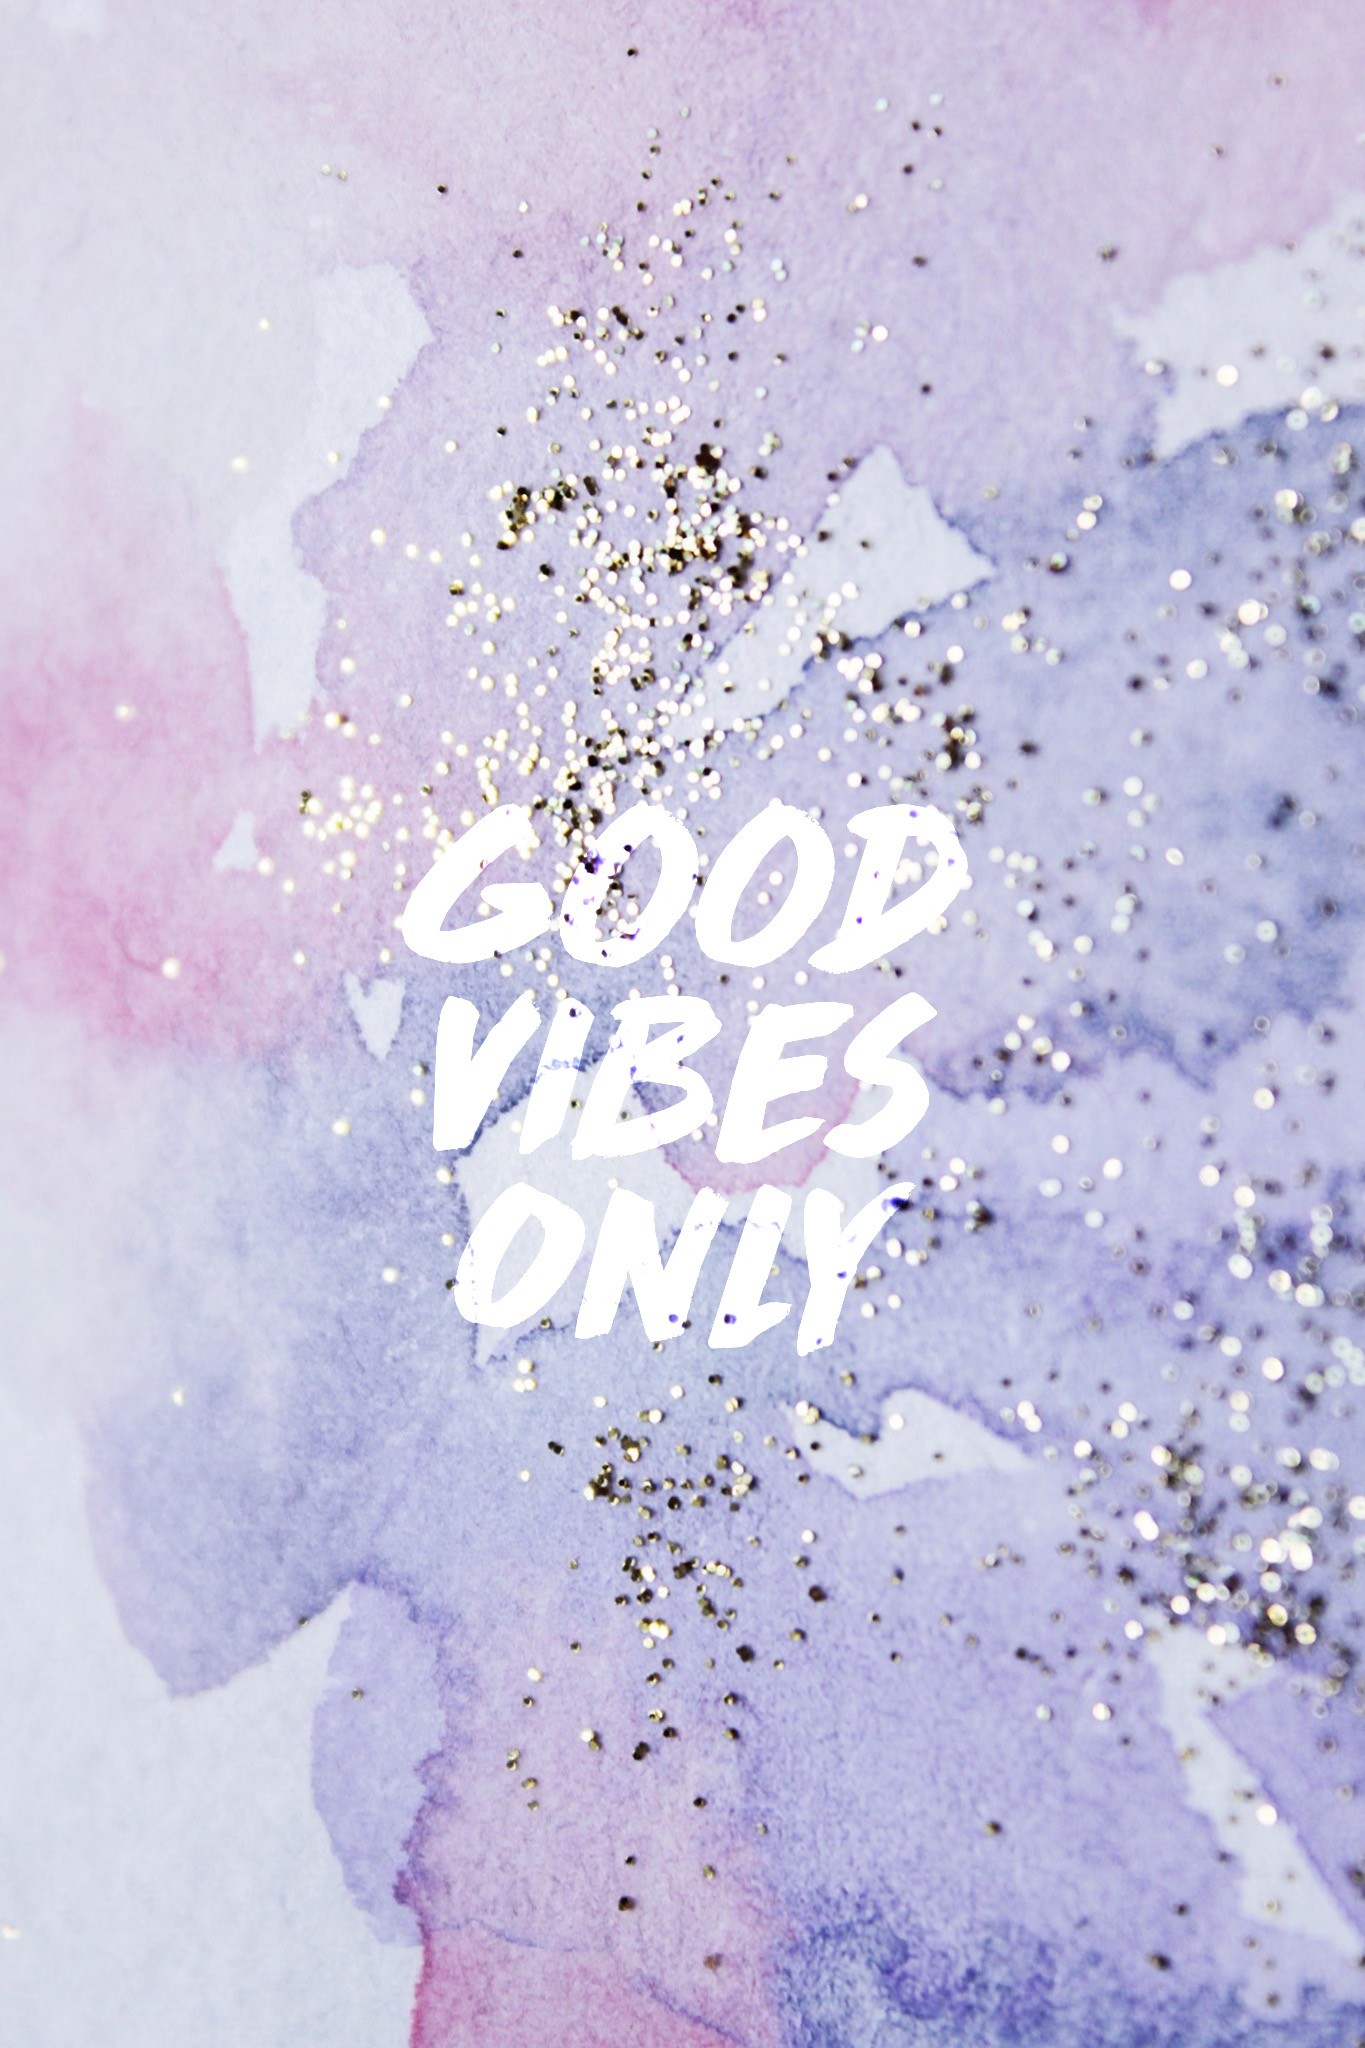 Good Vibes. #madewithover Download and edit your own iPhone wallpaper in Over today